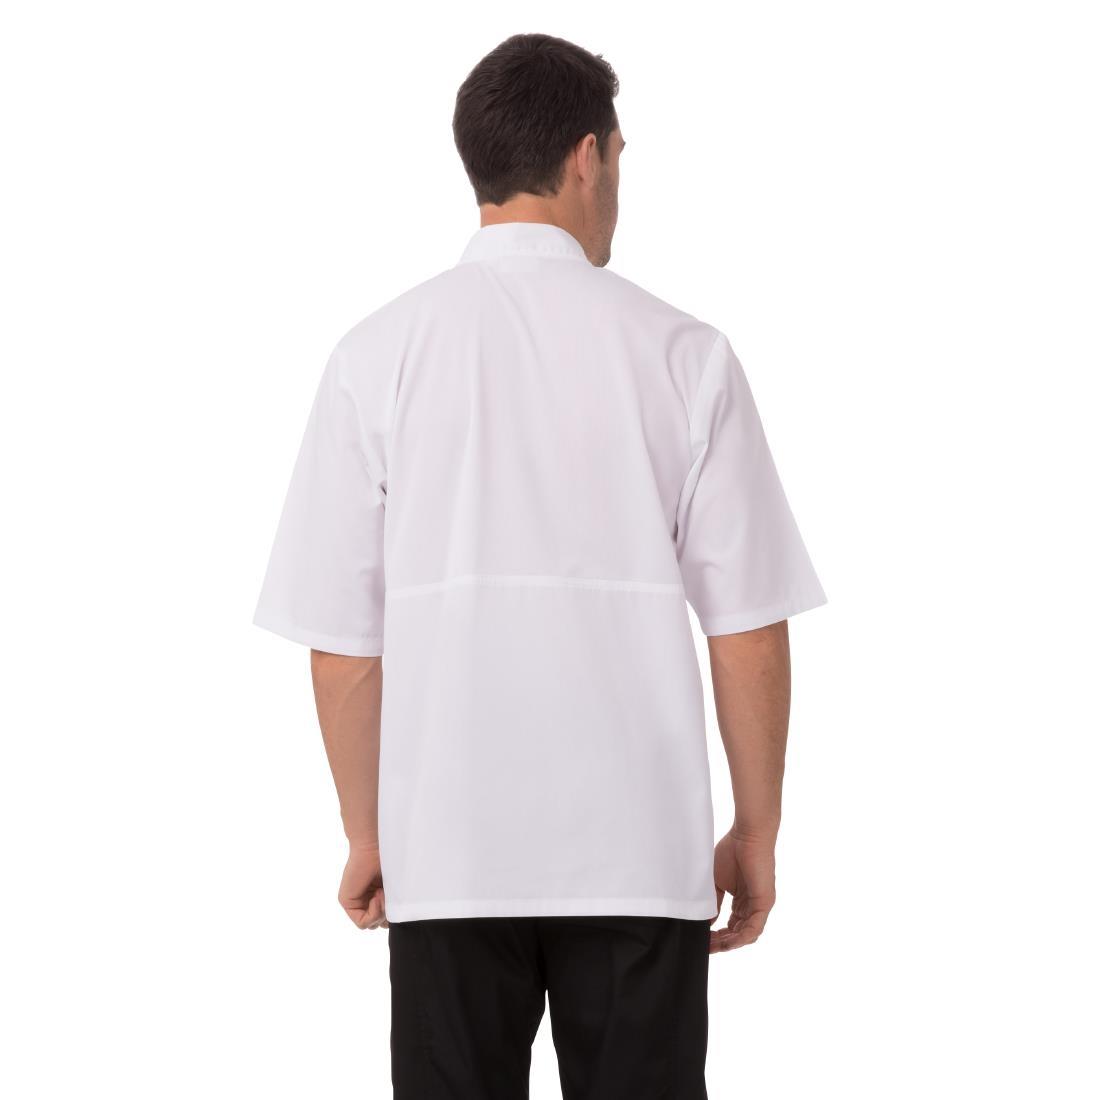 Chefs Works Montreal Cool Vent Unisex Short Sleeve Chefs Jacket White 2XL - A914-XXL  - 3